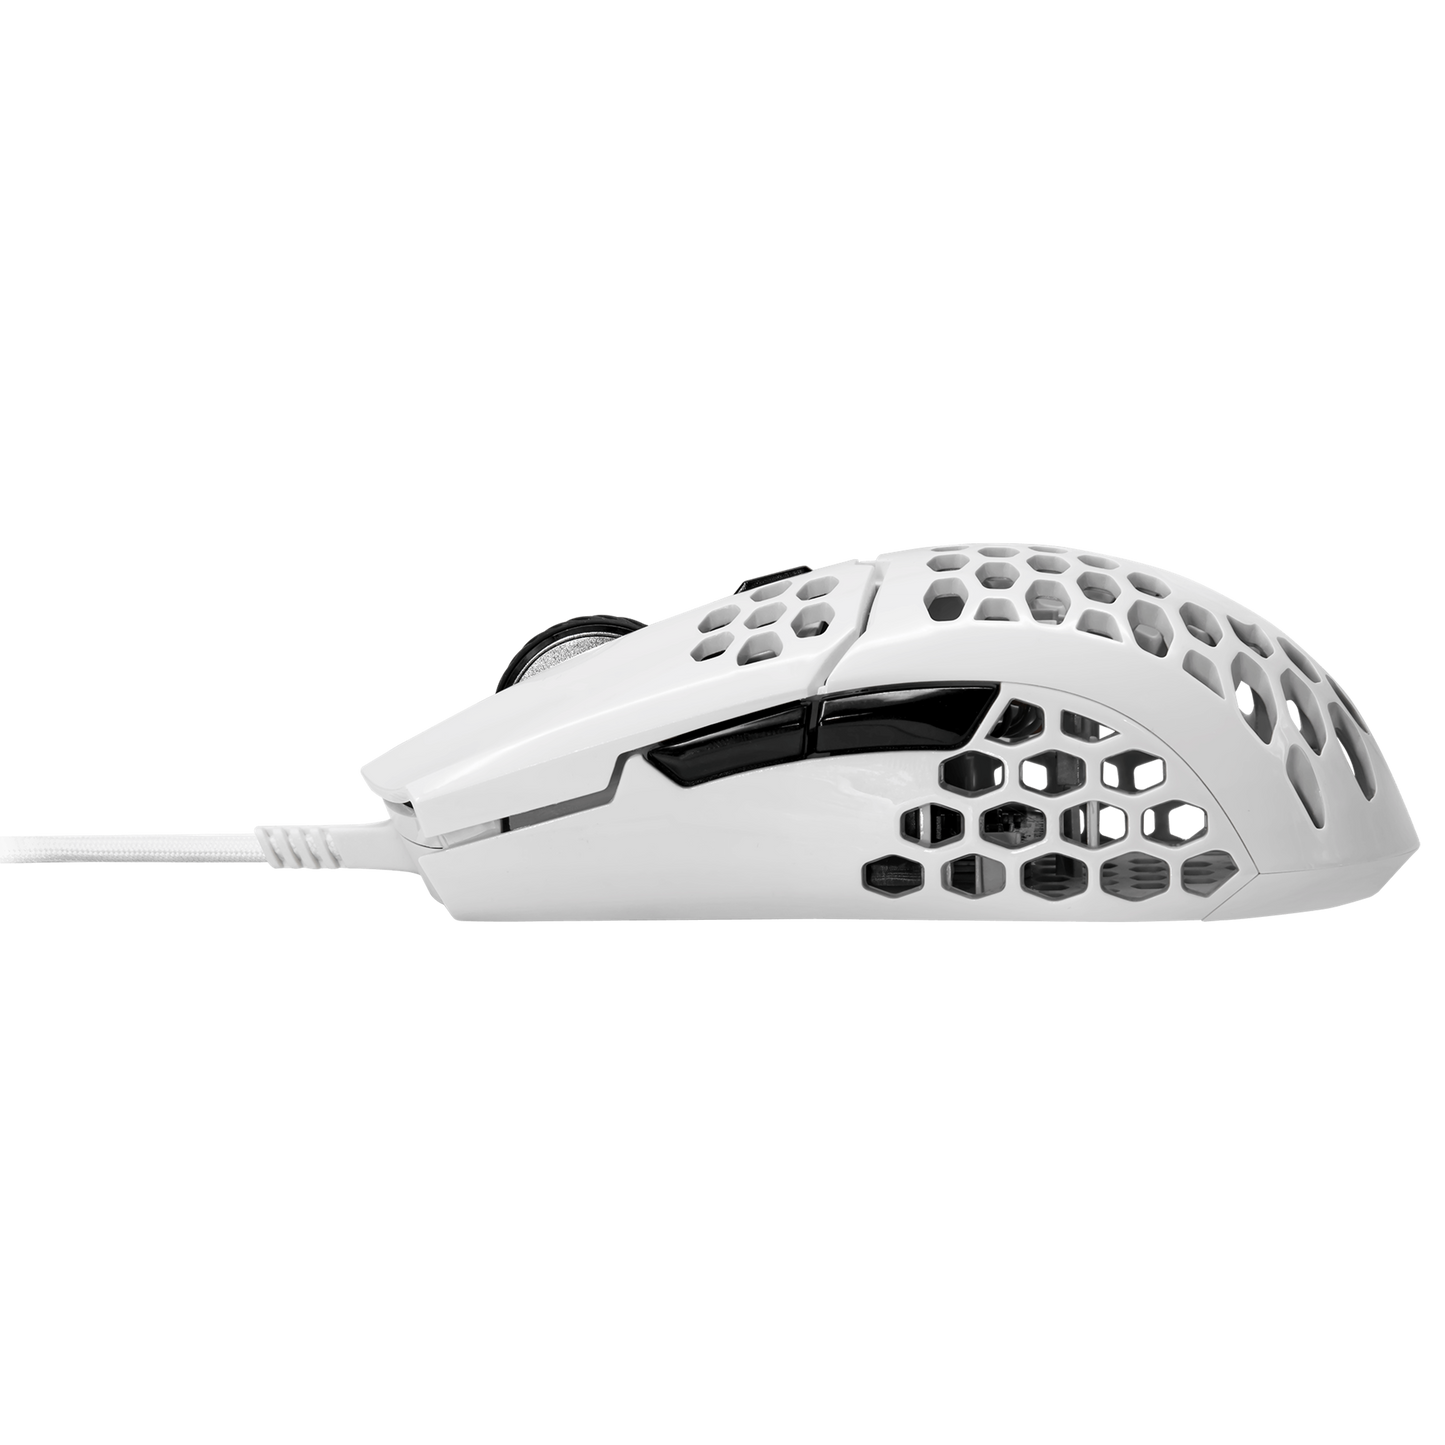 Cooler Master MM710 - Lightweight Gaming Mouse - Glossy White